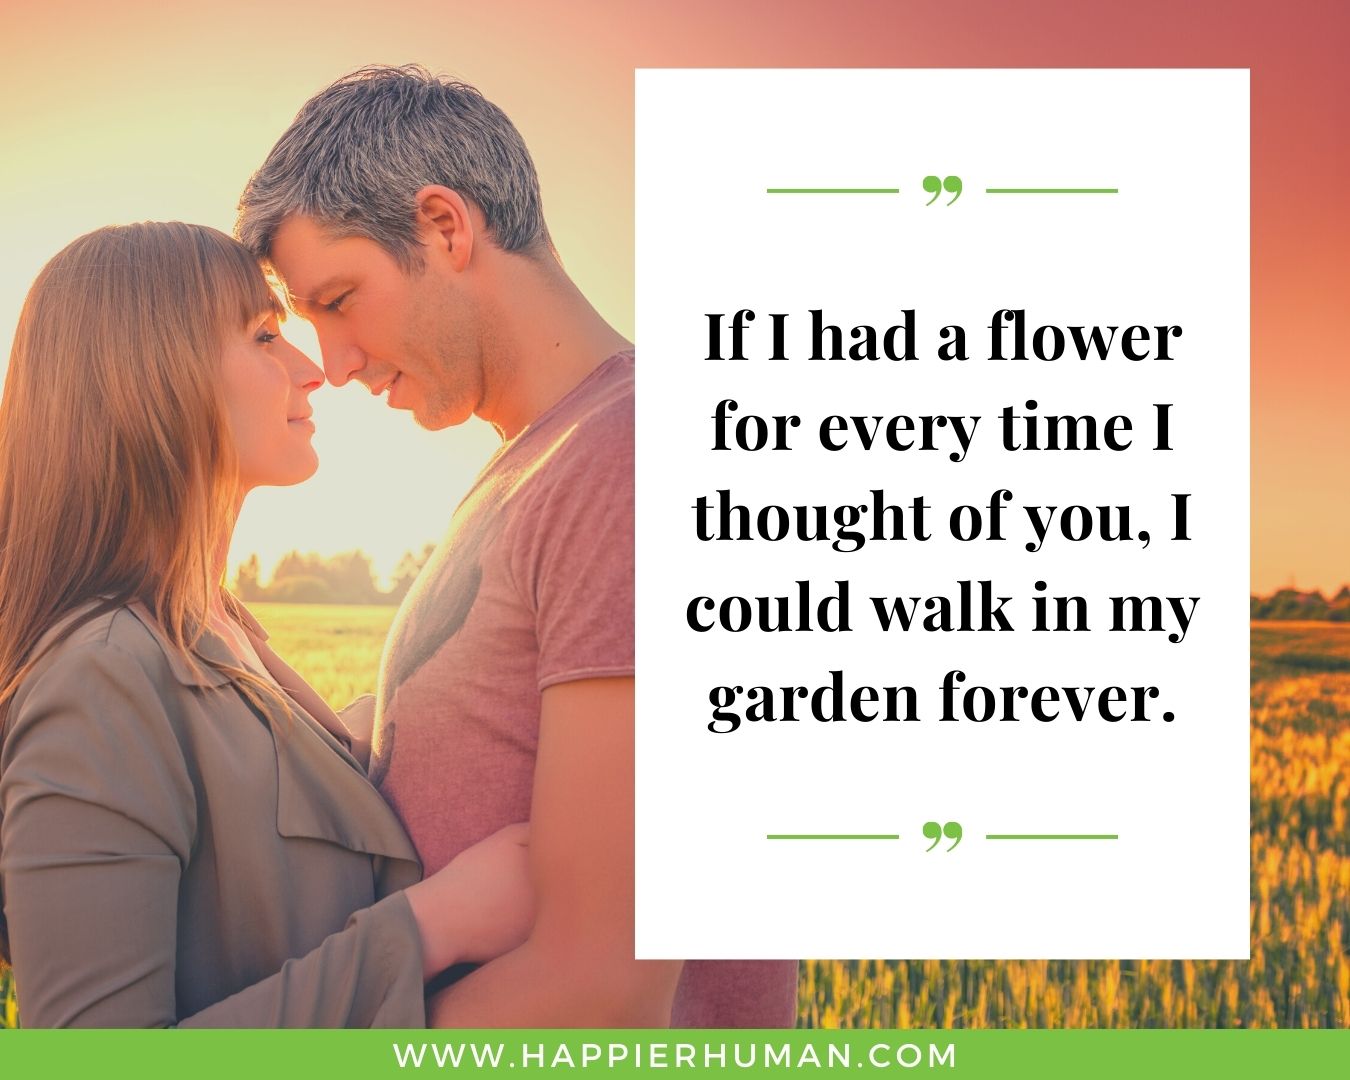 Inspiring quotes of love for her- “If I had a flower for every time I thought of you, I could walk in my garden forever.”